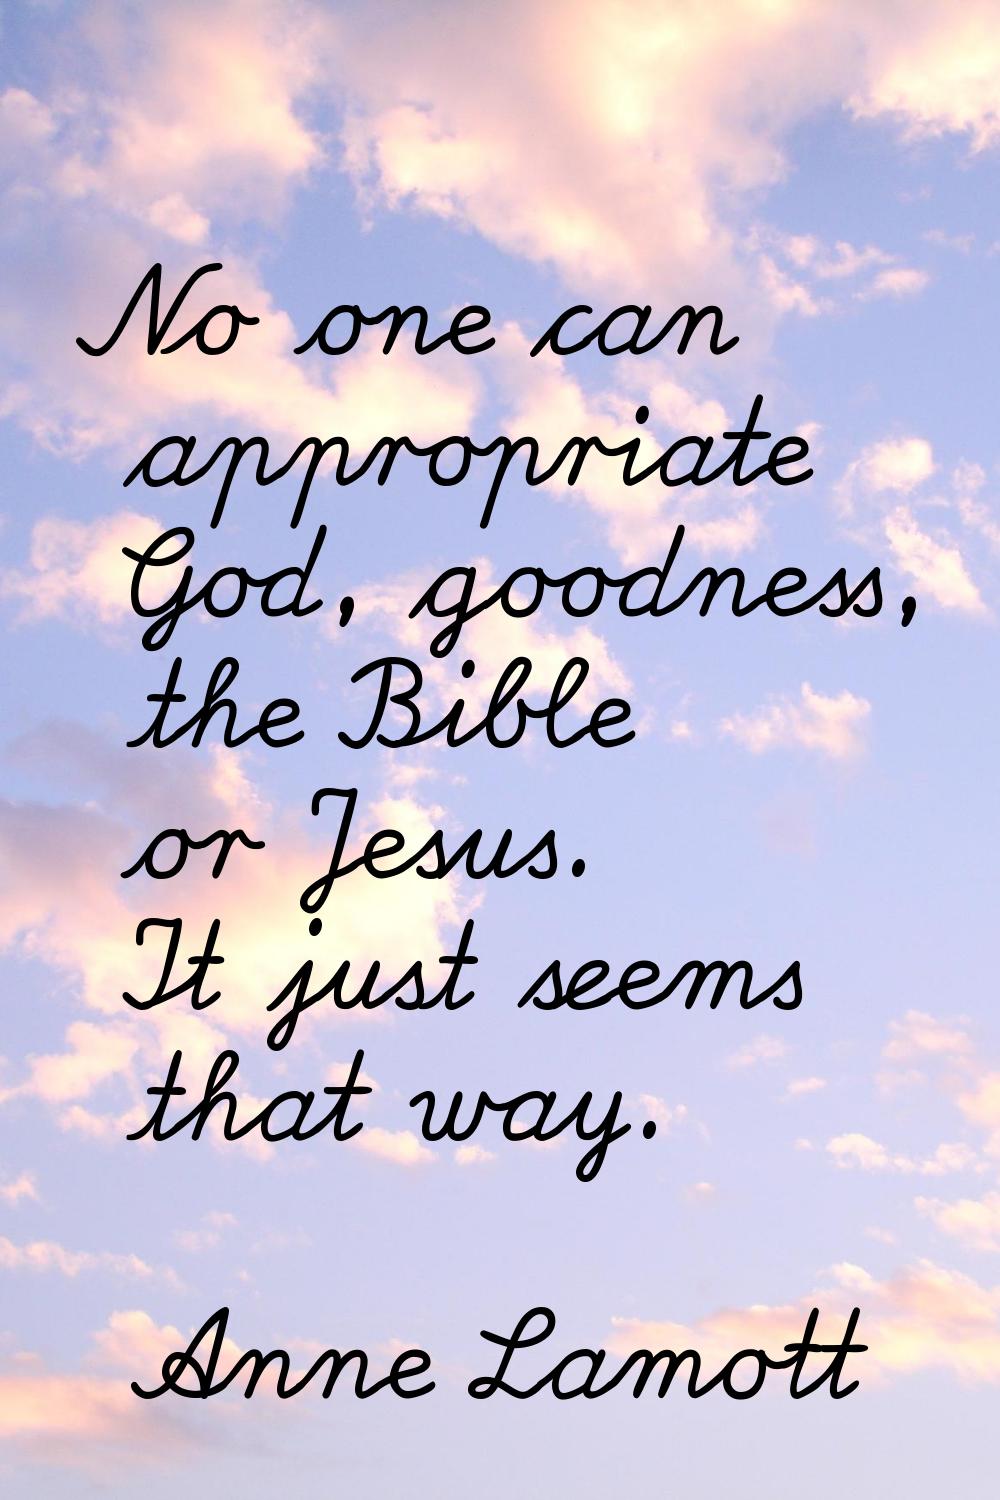 No one can appropriate God, goodness, the Bible or Jesus. It just seems that way.